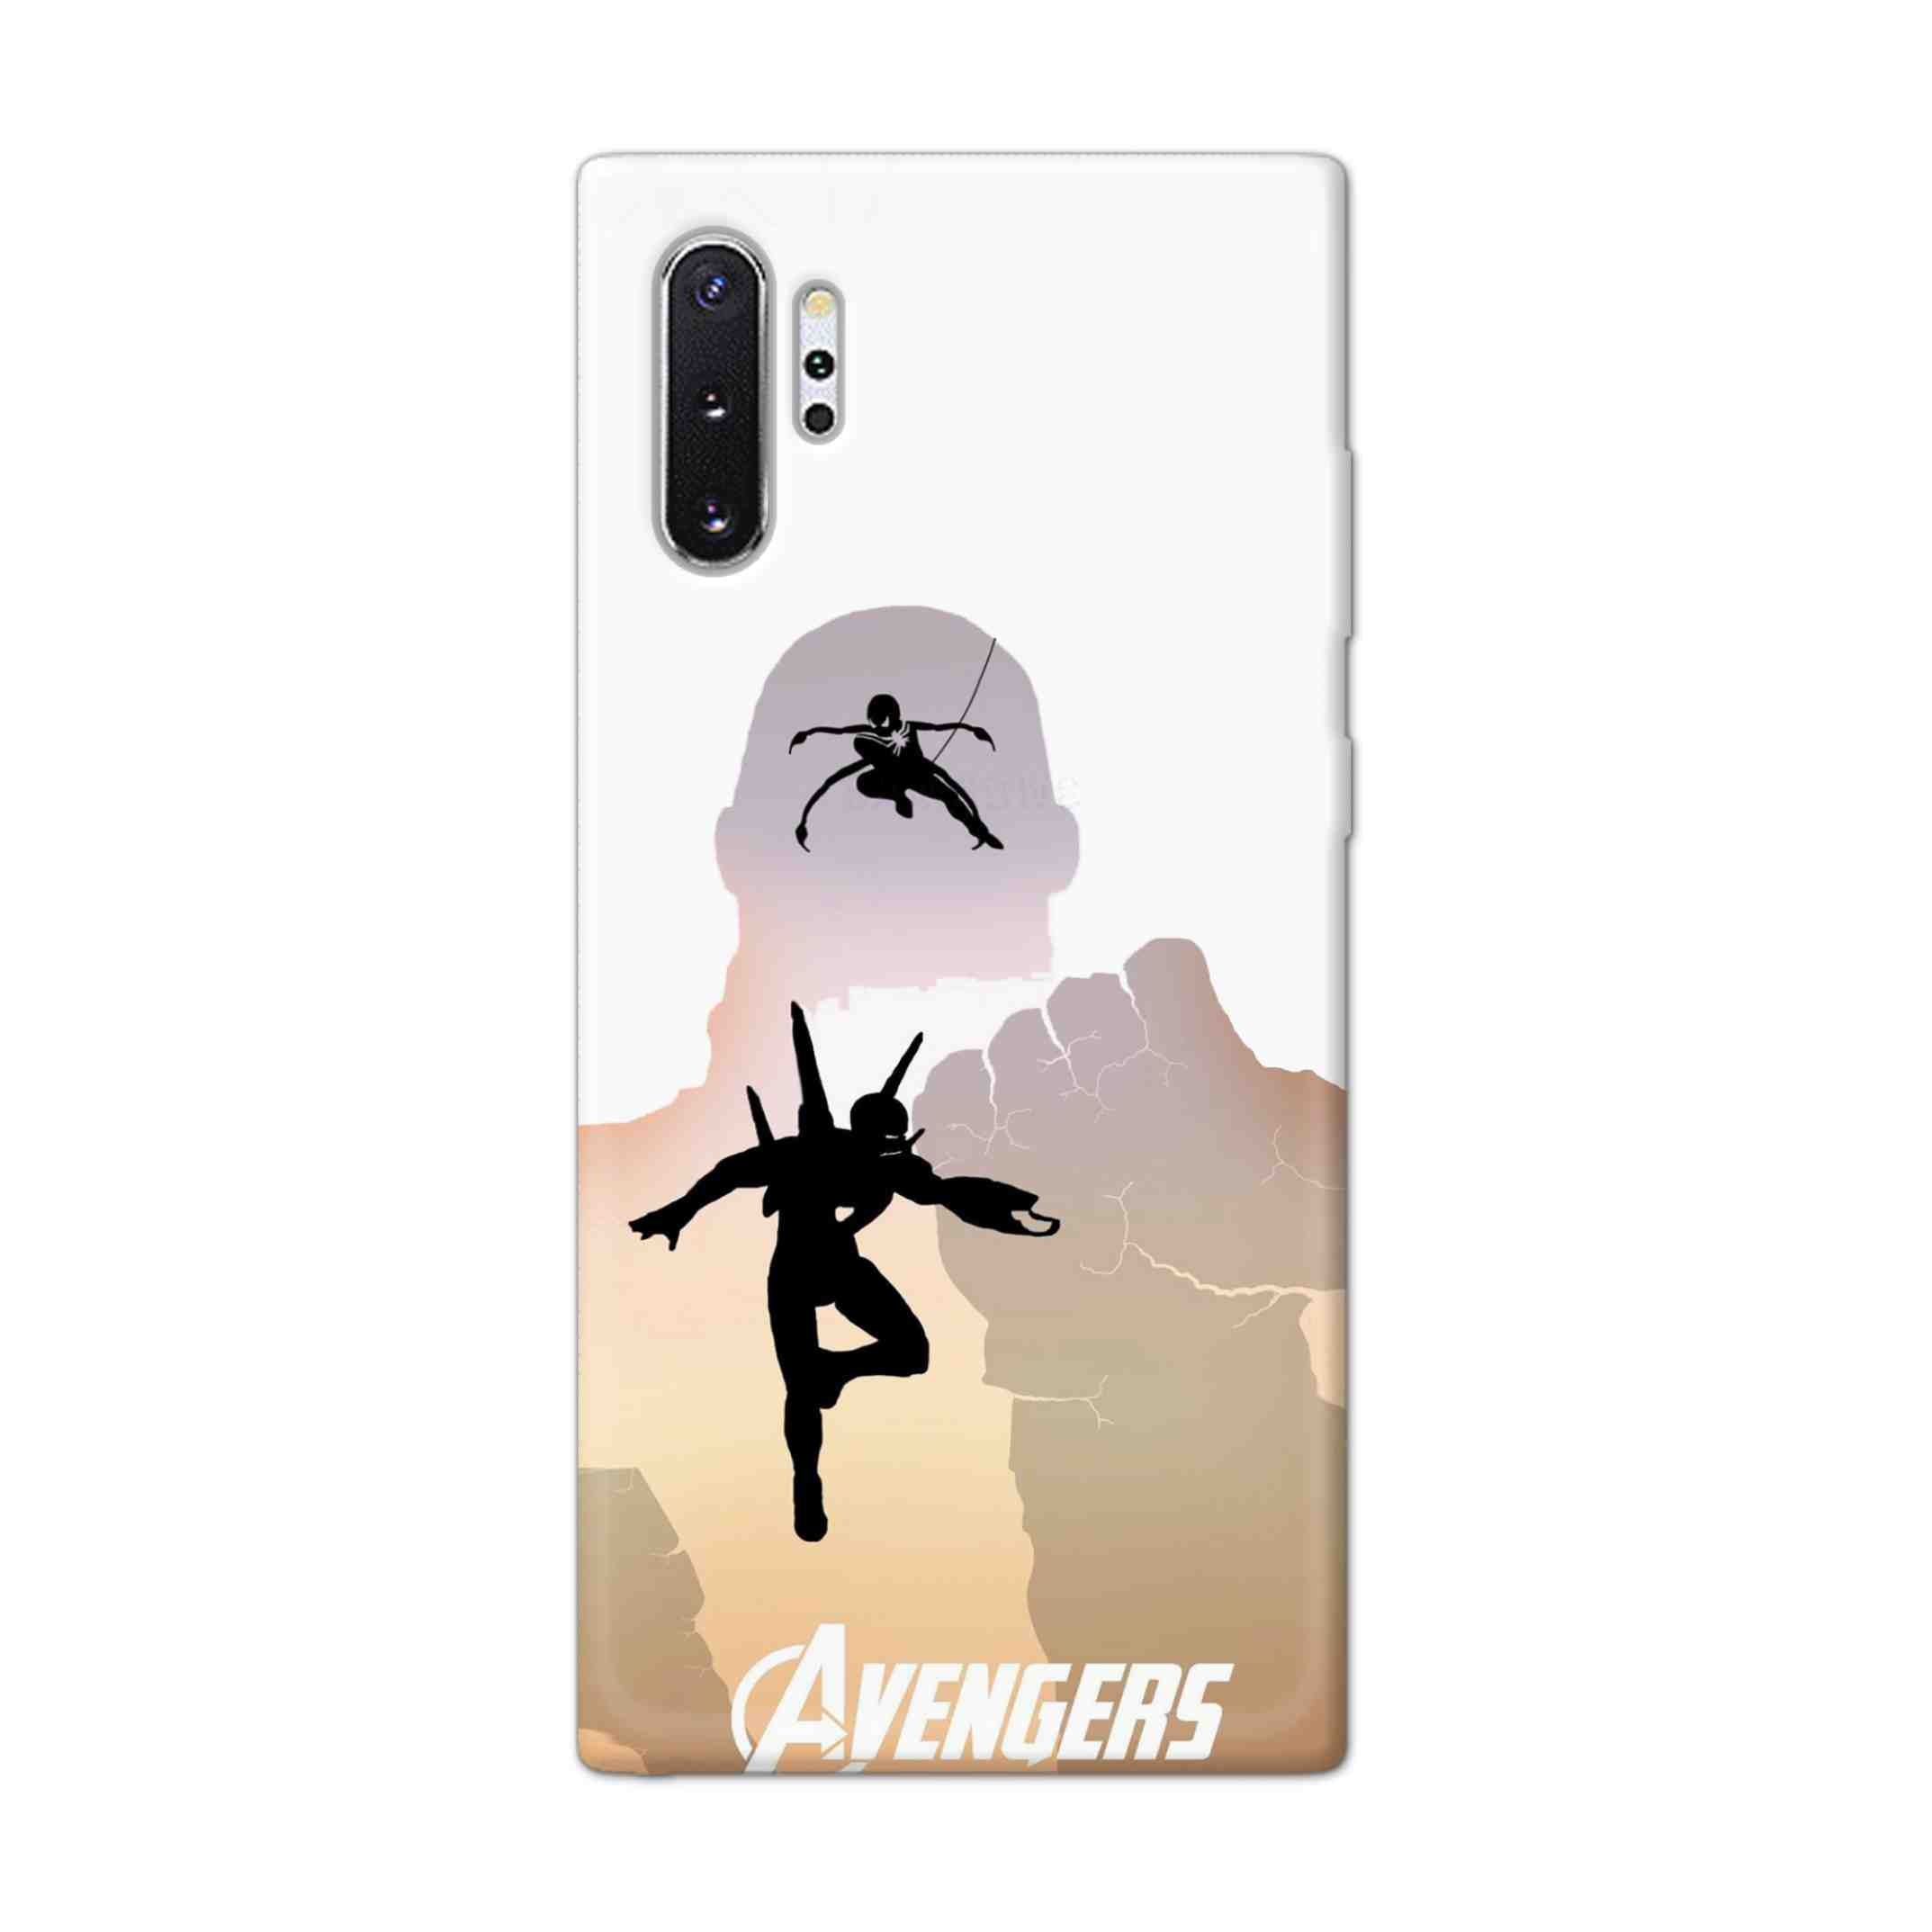 Buy Iron Man Vs Spiderman Hard Back Mobile Phone Case Cover For Samsung Note 10 Plus (5G) Online